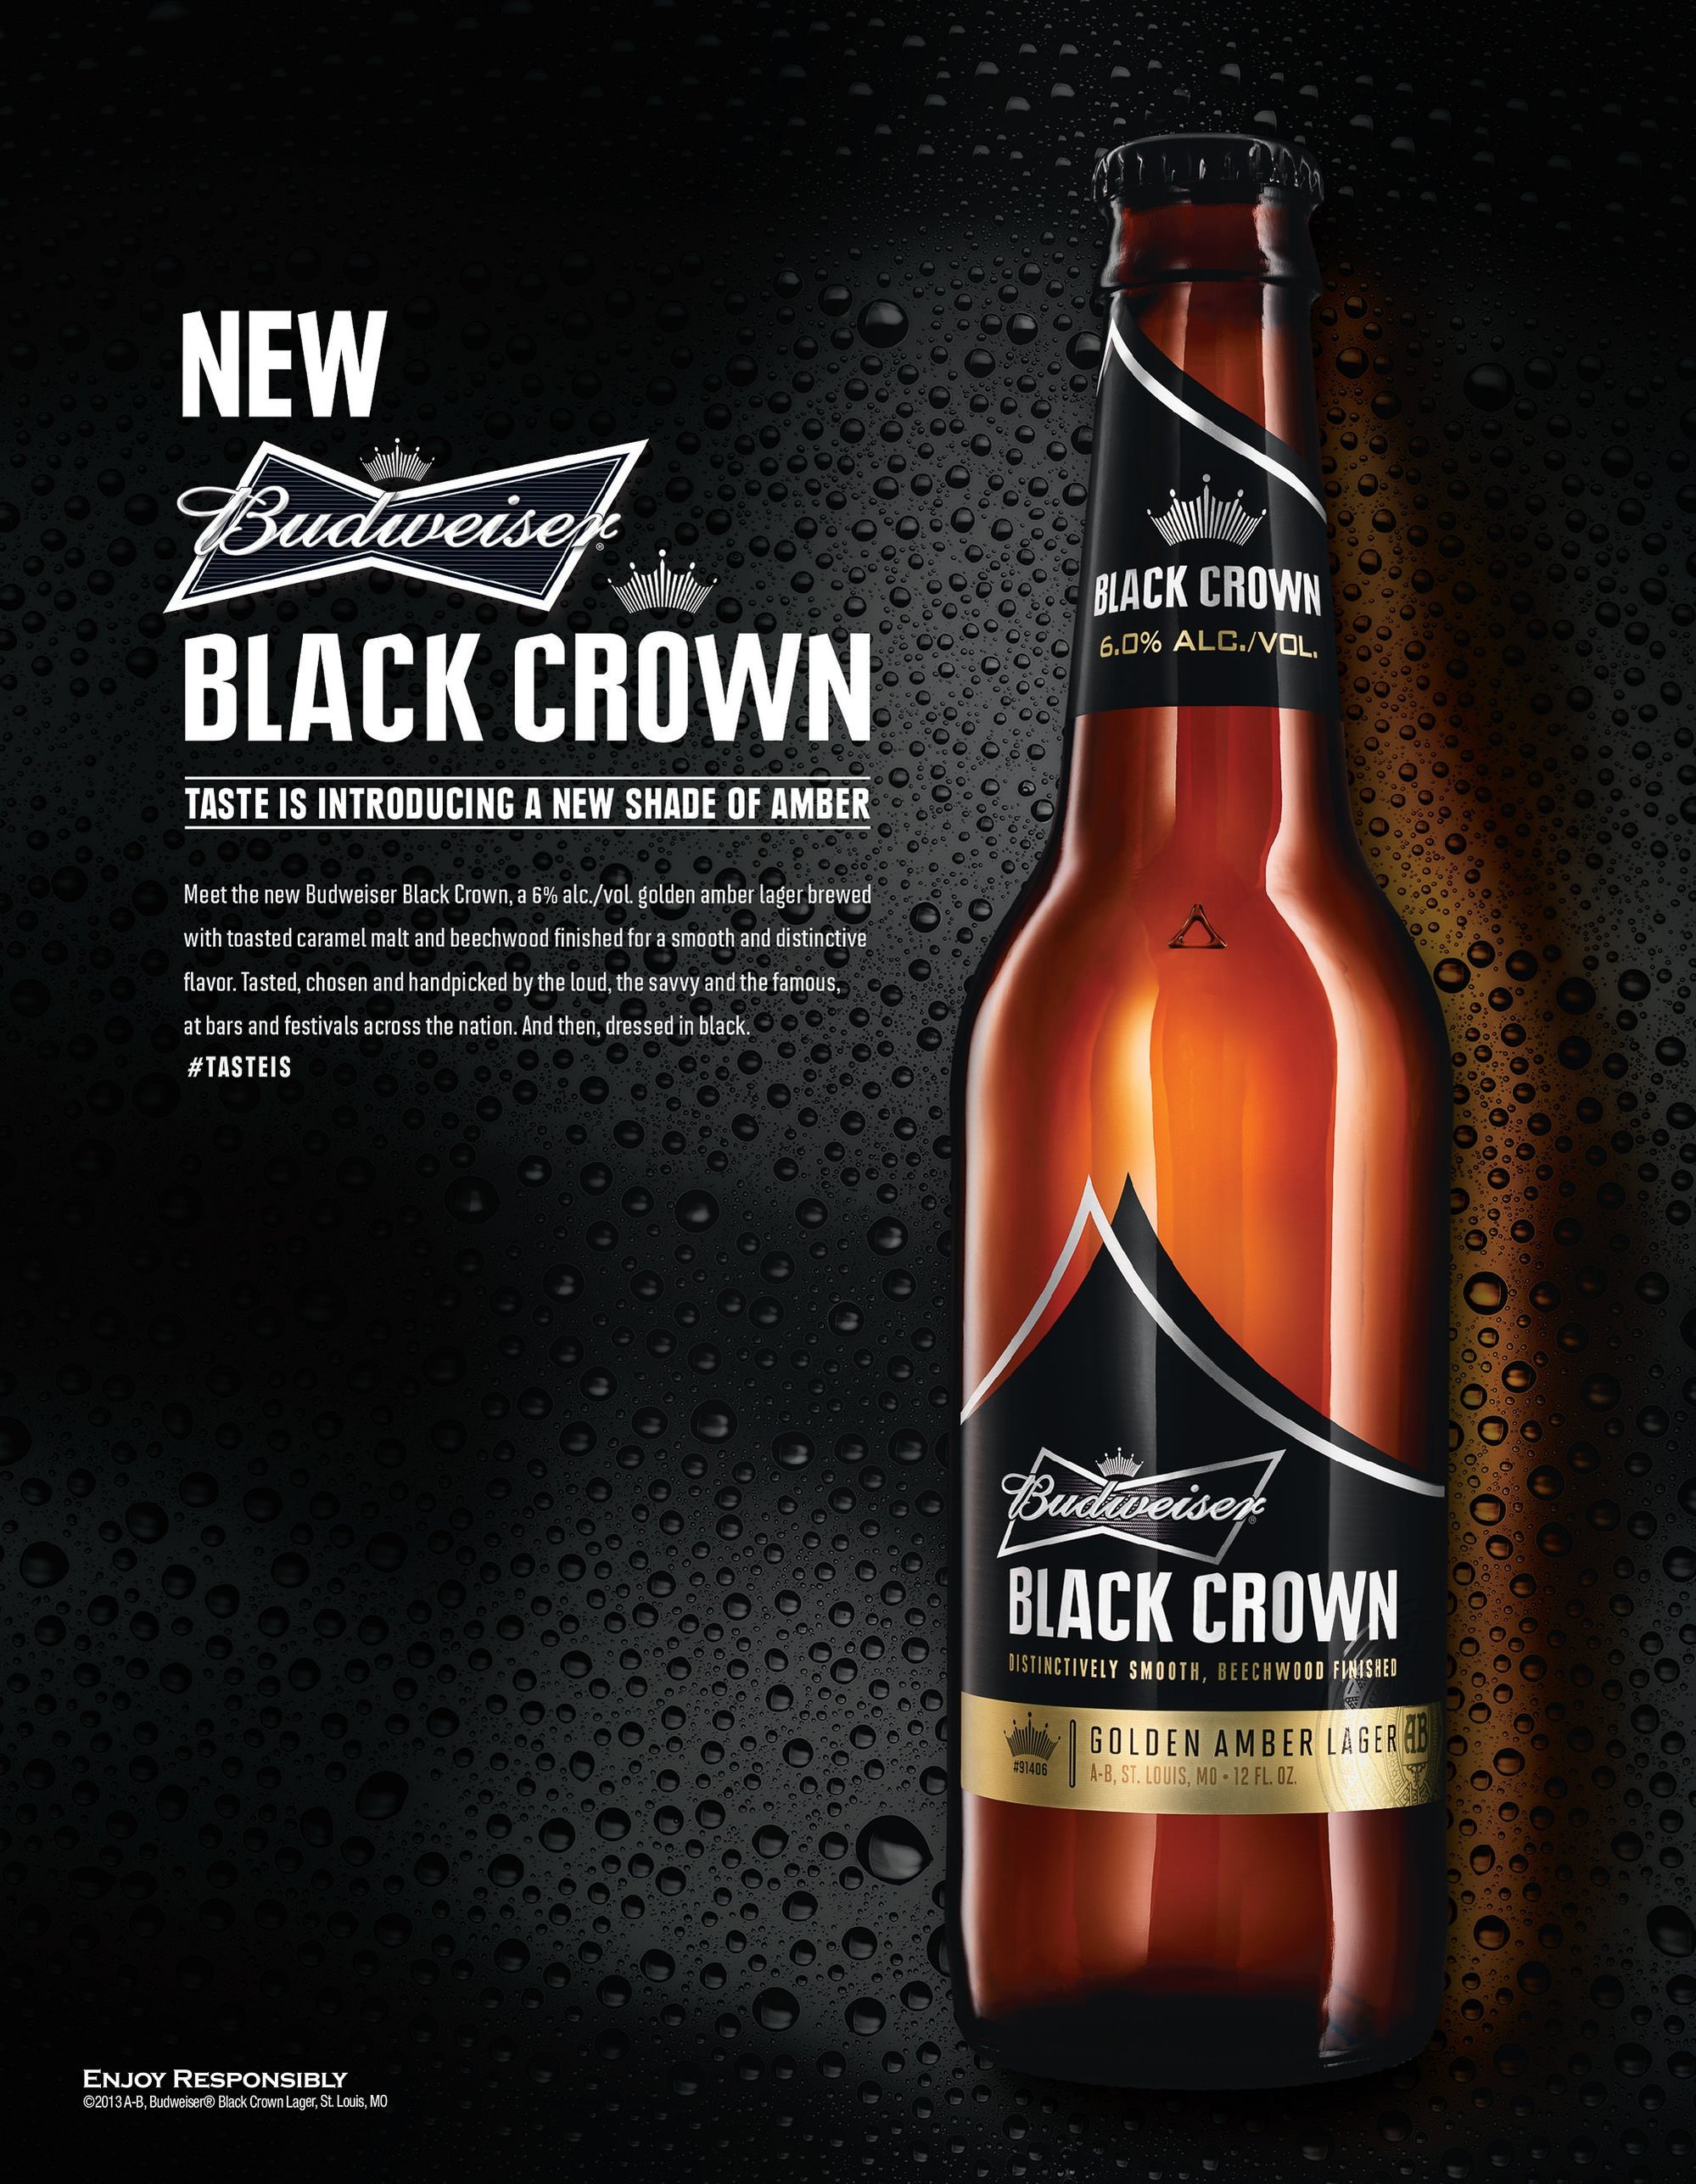 Budweiser Black Crown beer beverage campaign Photography by commercial, product & advertising photographer Timothy Hogan in studio Los Angeles